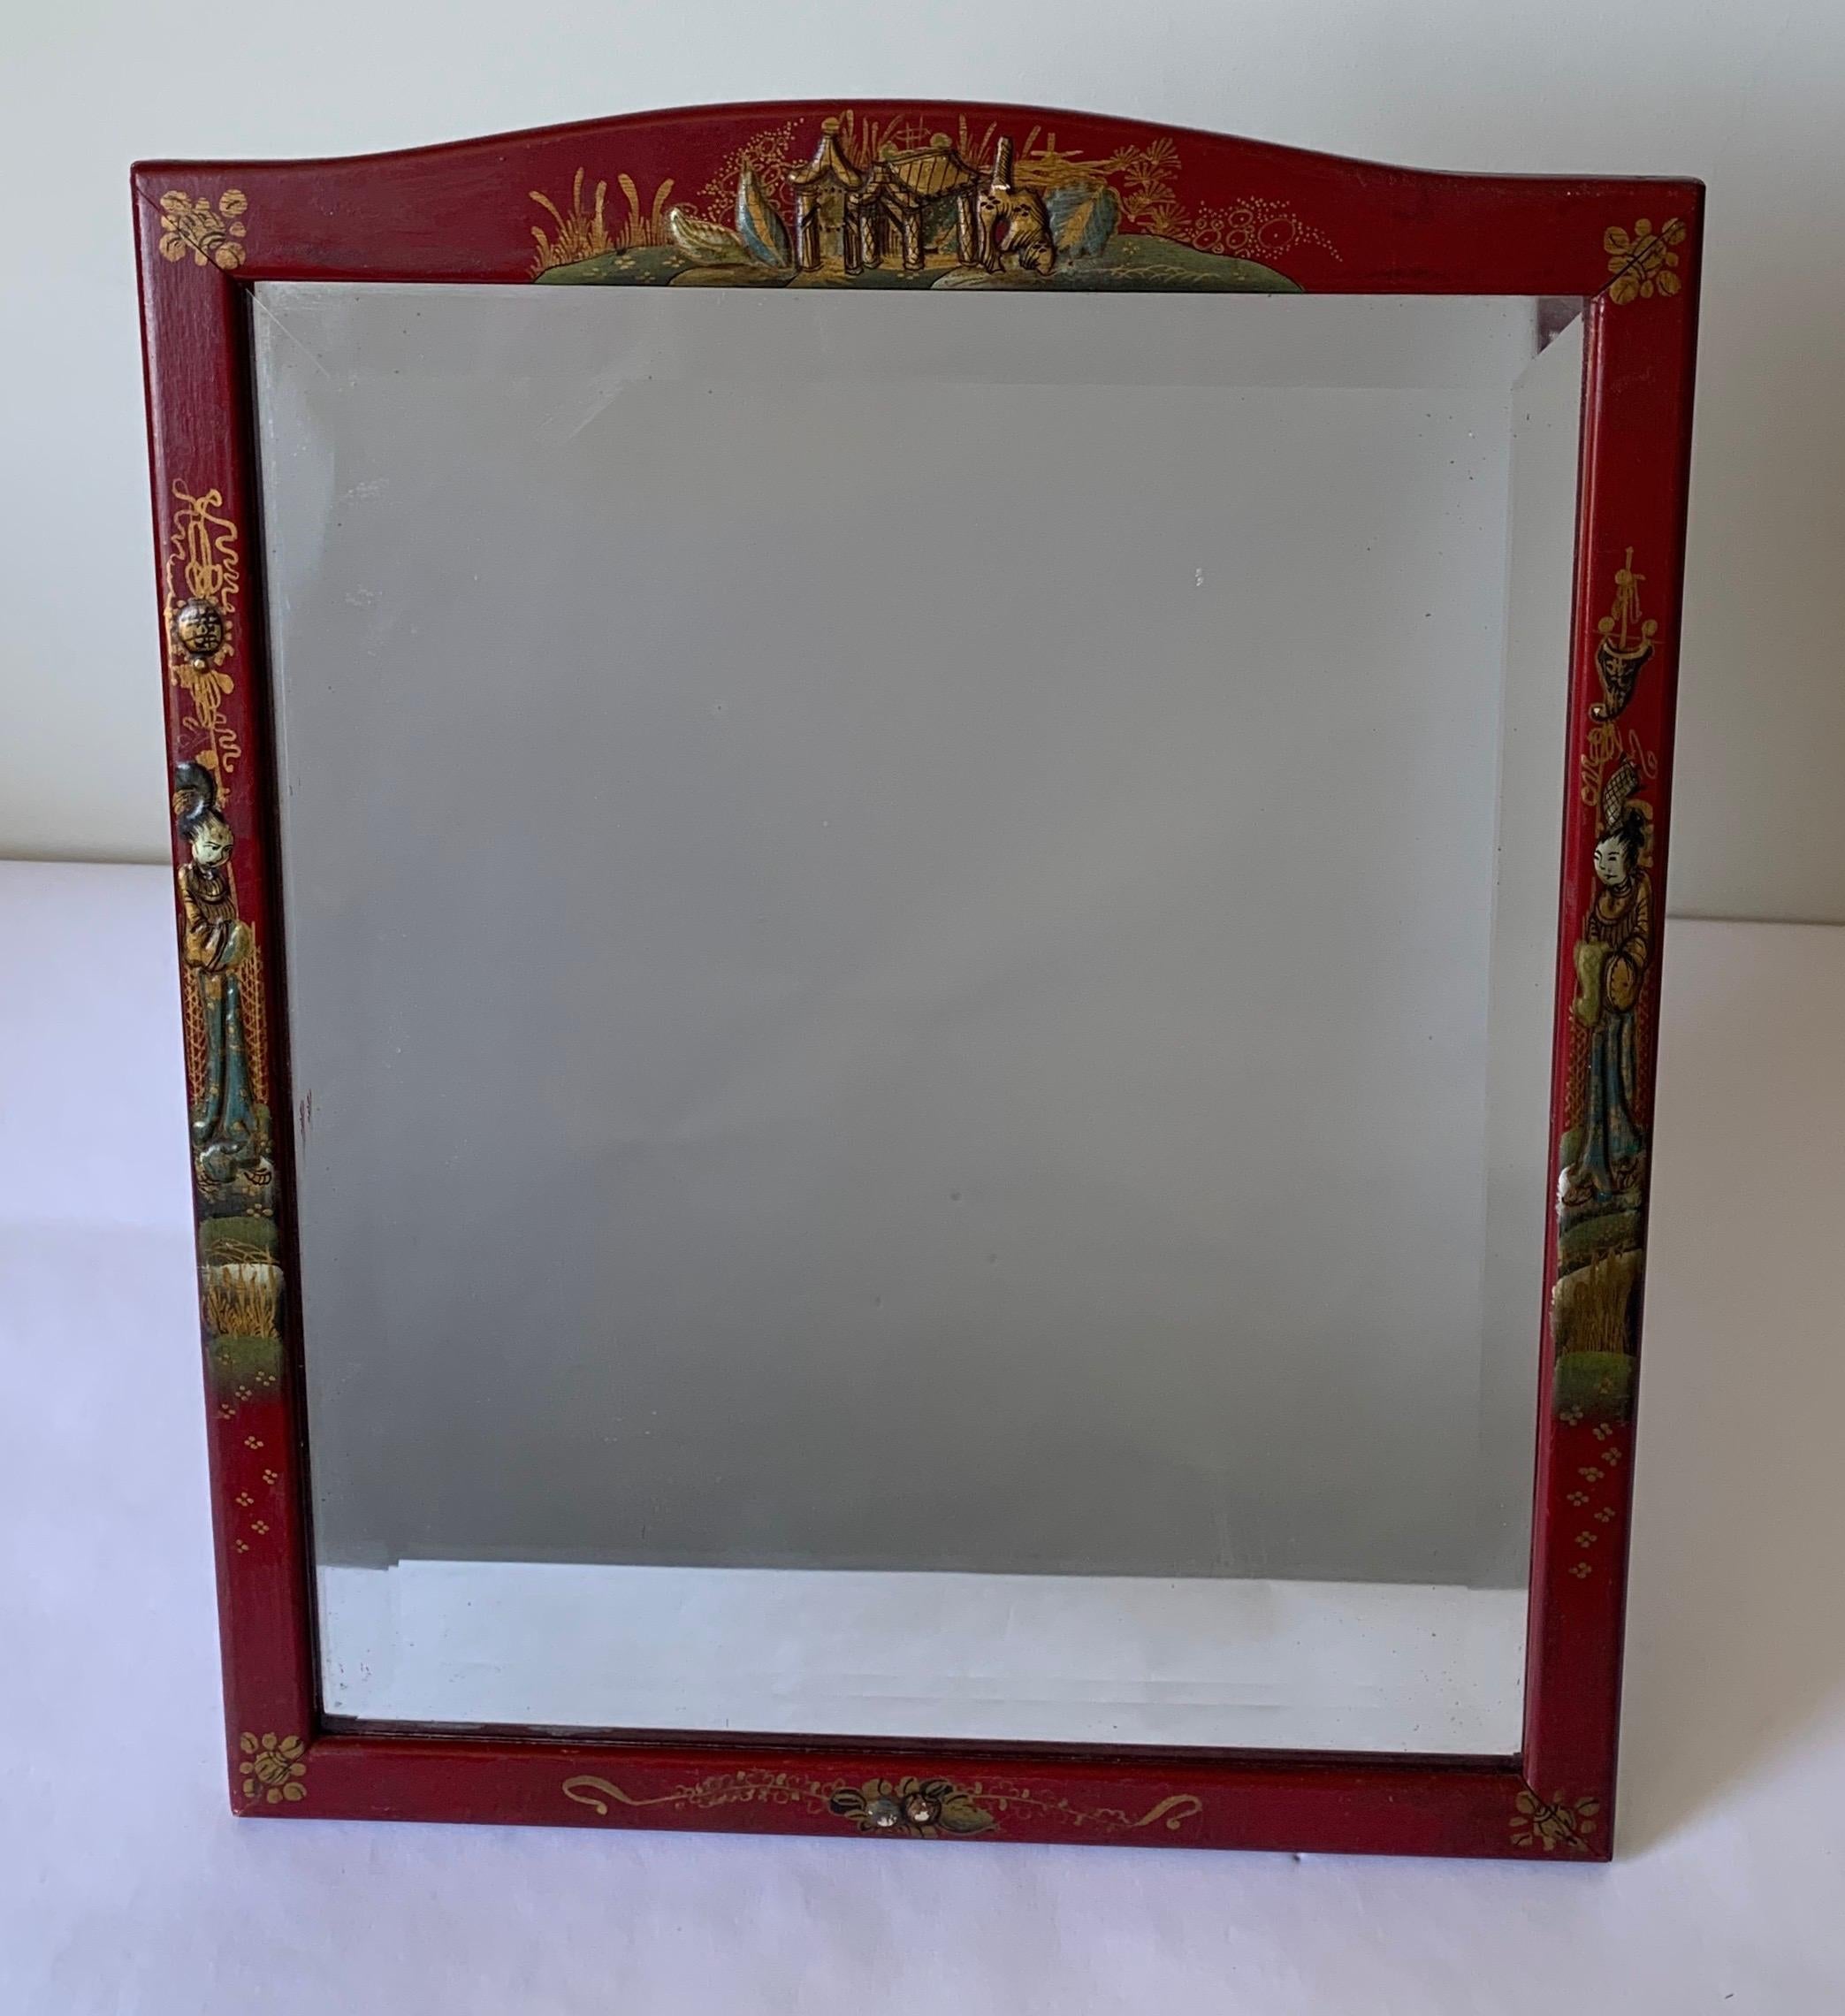 Cinnabar red chinoiserie vanity mirror with all-over hand painted gold chinoiserie detailing. Original bevelled mirrored inset glass. Original backing with easel stand and attached chain for hanging.